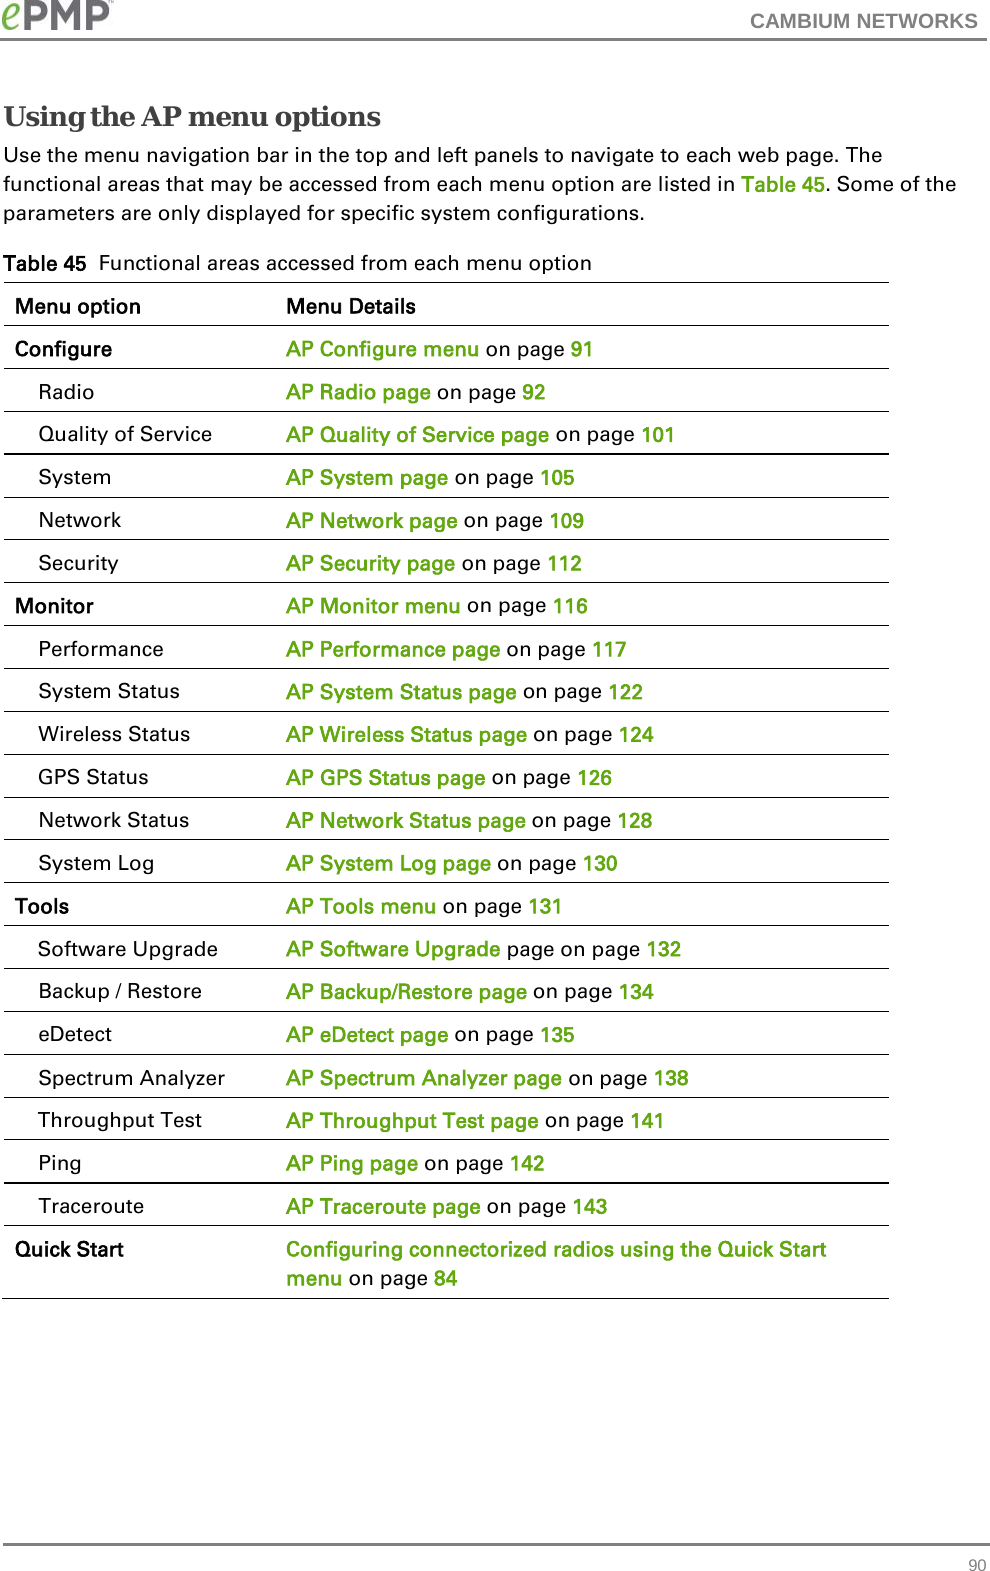 CAMBIUM NETWORKS  Using the AP menu options Use the menu navigation bar in the top and left panels to navigate to each web page. The functional areas that may be accessed from each menu option are listed in Table 45. Some of the parameters are only displayed for specific system configurations. Table 45  Functional areas accessed from each menu option Menu option Menu Details Configure AP Configure menu on page 91     Radio AP Radio page on page 92     Quality of Service AP Quality of Service page on page 101     System AP System page on page 105     Network AP Network page on page 109     Security AP Security page on page 112 Monitor AP Monitor menu on page 116     Performance AP Performance page on page 117     System Status AP System Status page on page 122     Wireless Status AP Wireless Status page on page 124      GPS Status AP GPS Status page on page 126     Network Status AP Network Status page on page 128     System Log AP System Log page on page 130 Tools AP Tools menu on page 131     Software Upgrade AP Software Upgrade page on page 132     Backup / Restore AP Backup/Restore page on page 134     eDetect AP eDetect page on page 135     Spectrum Analyzer AP Spectrum Analyzer page on page 138     Throughput Test AP Throughput Test page on page 141     Ping AP Ping page on page 142     Traceroute AP Traceroute page on page 143 Quick Start Configuring connectorized radios using the Quick Start menu on page 84      90 